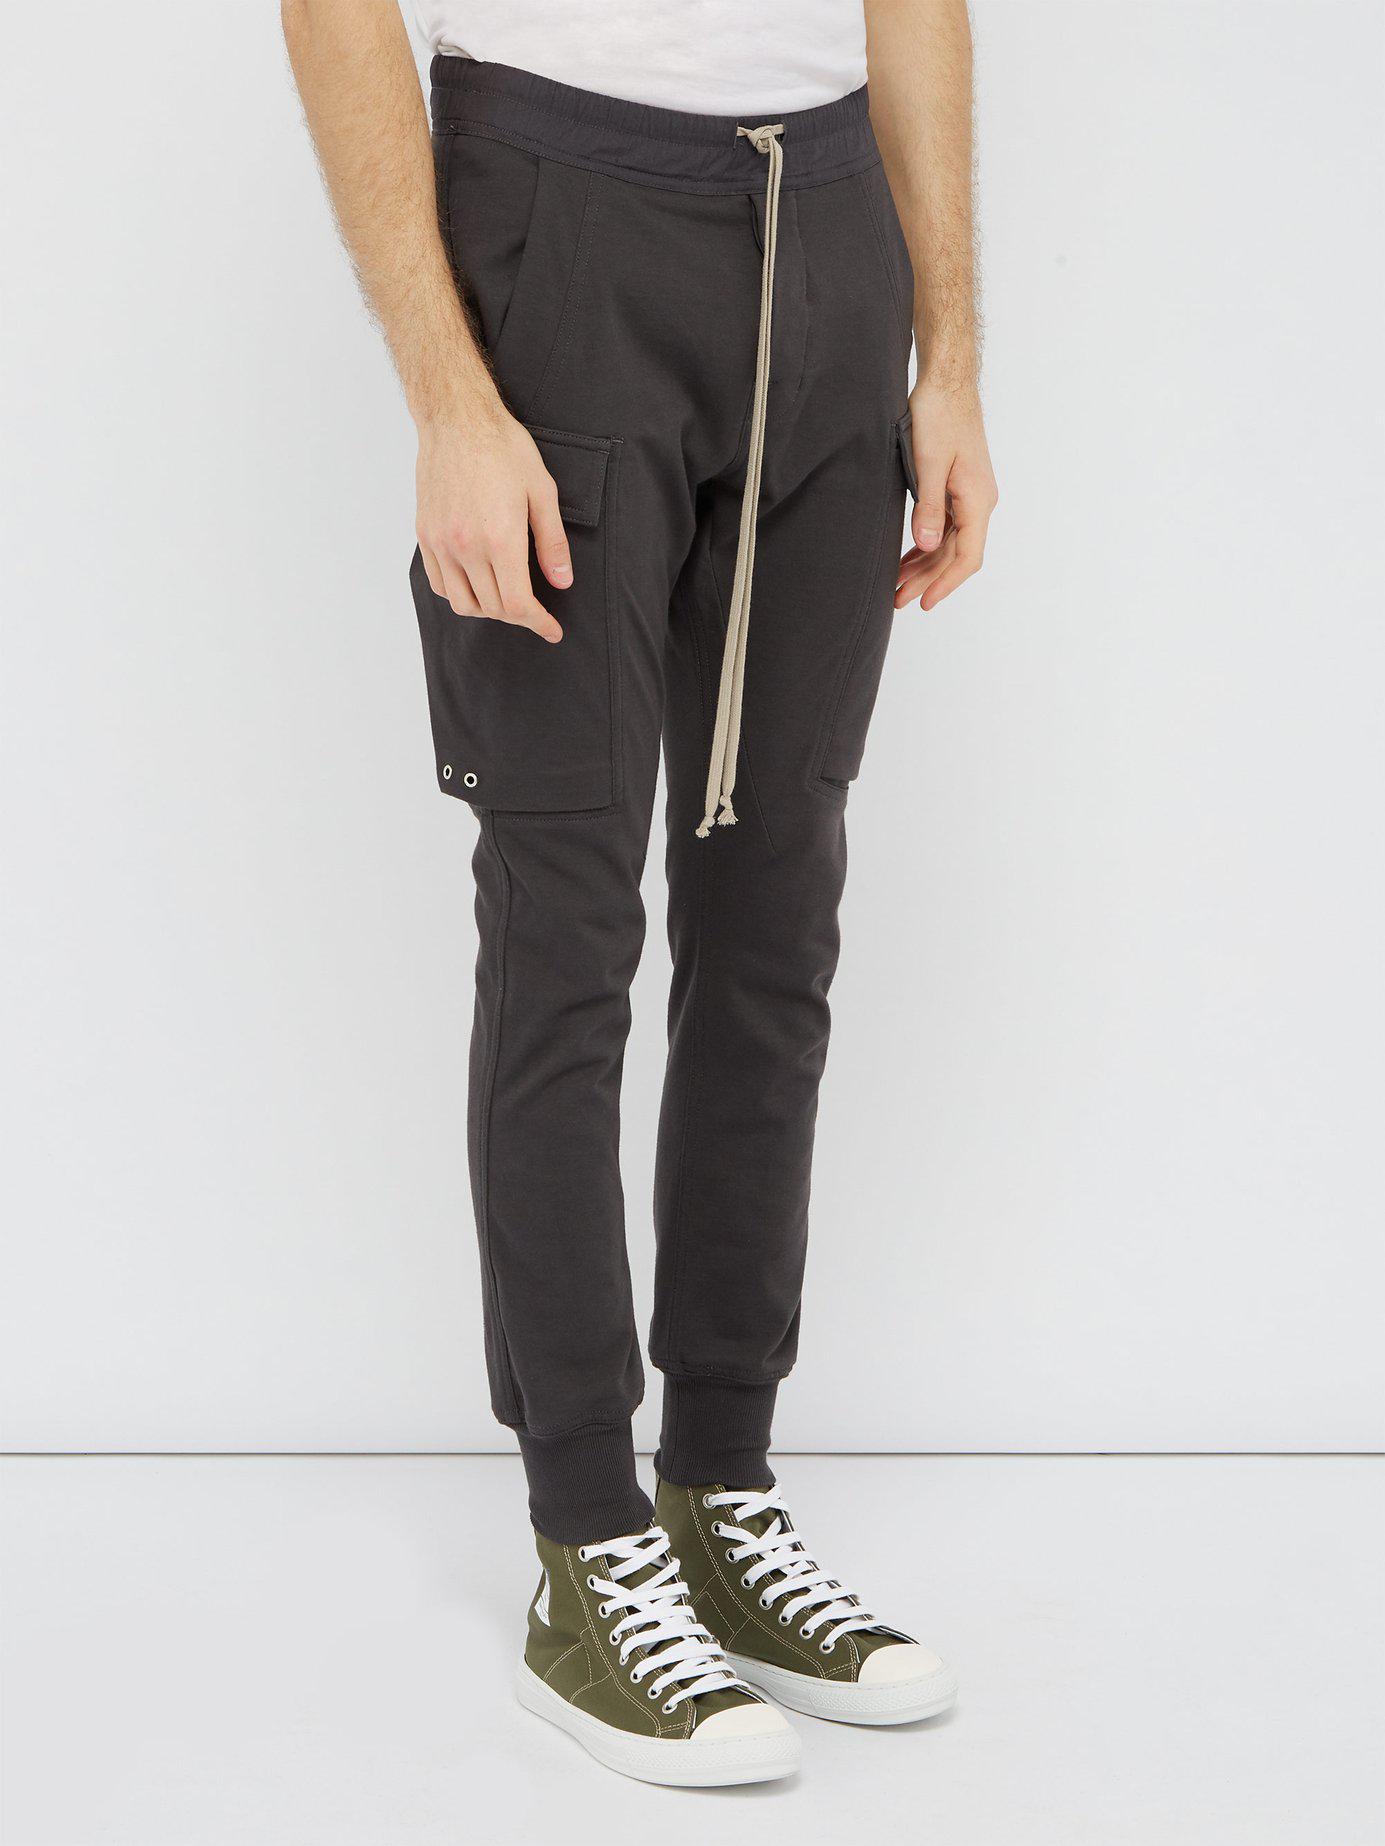 Rick Owens Babel Cotton Cargo Track Pants in Gray for Men - Lyst